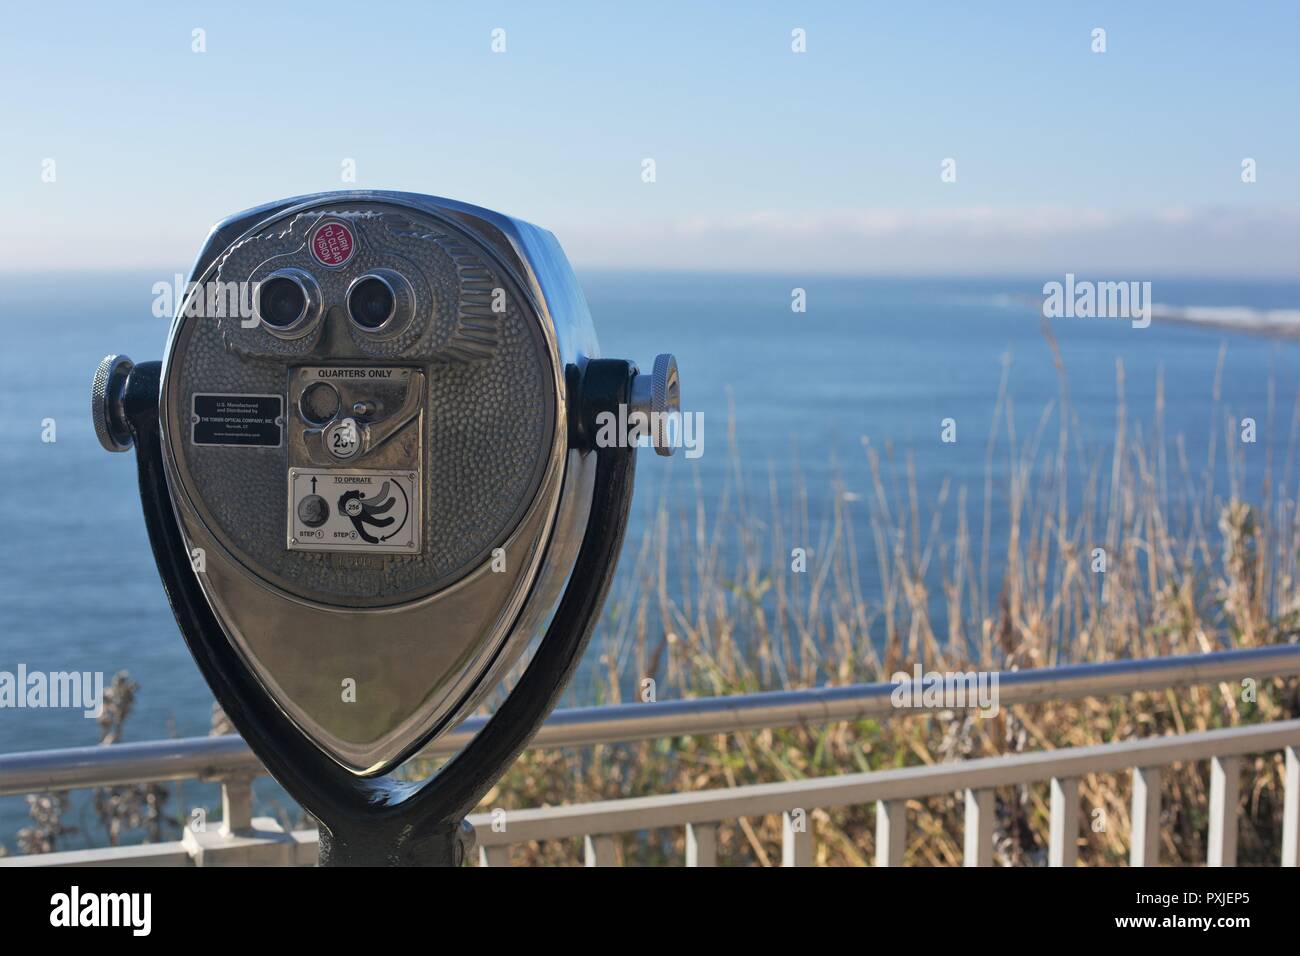 Coin operated viewing binoculars at Cape Disappointment in Washington, USA. Stock Photo